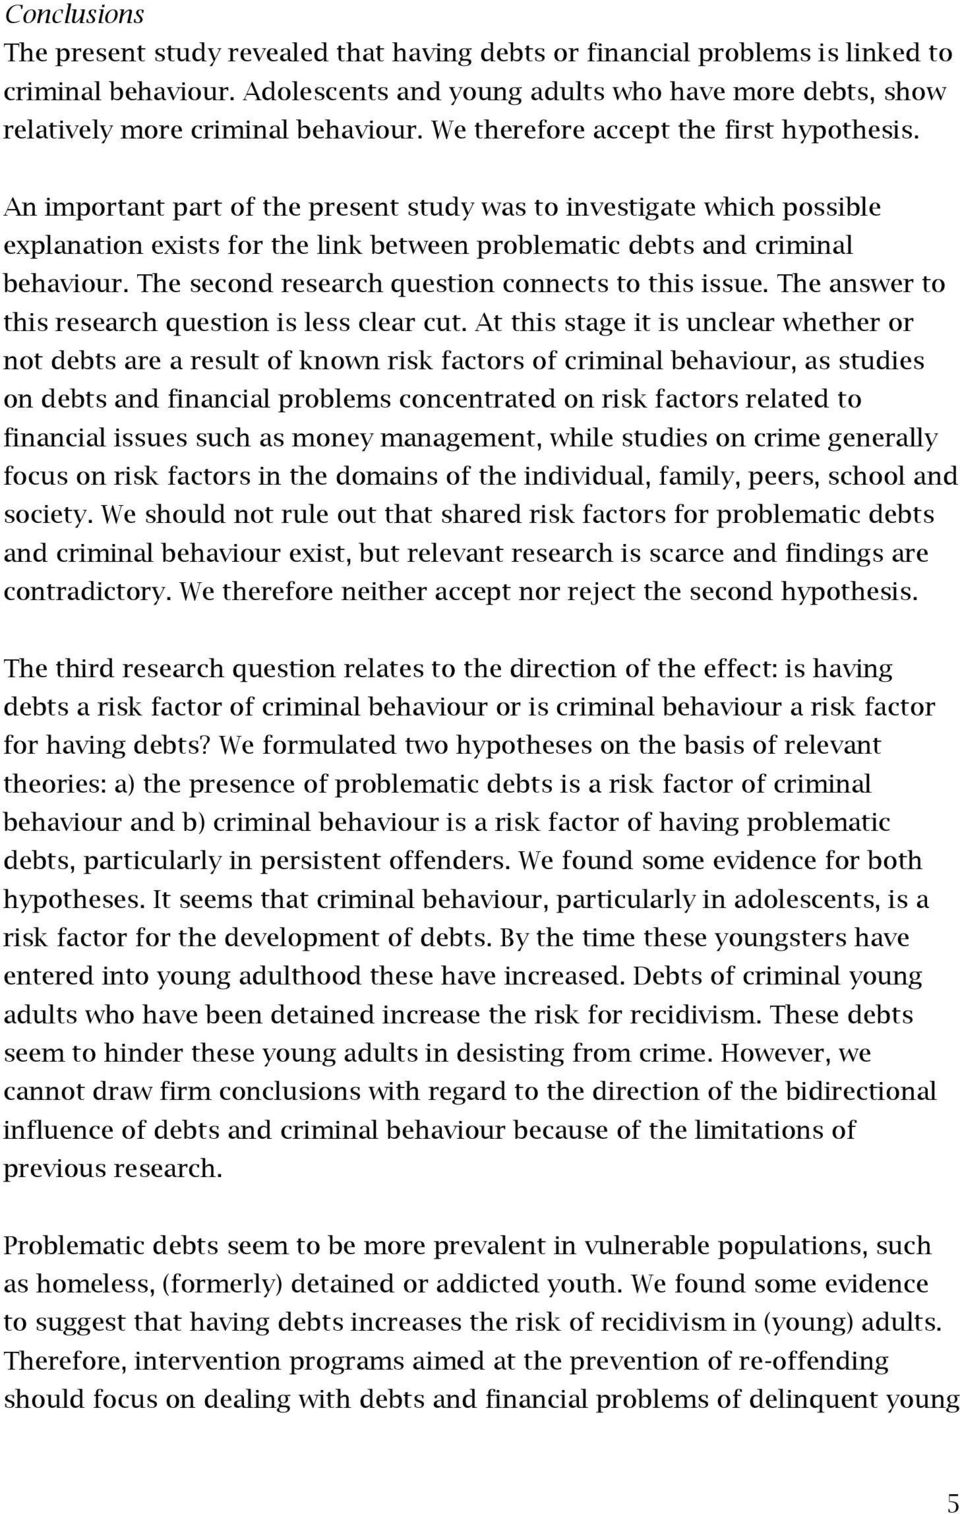 An important part of the present study was to investigate which possible explanation exists for the link between problematic debts and criminal behaviour.